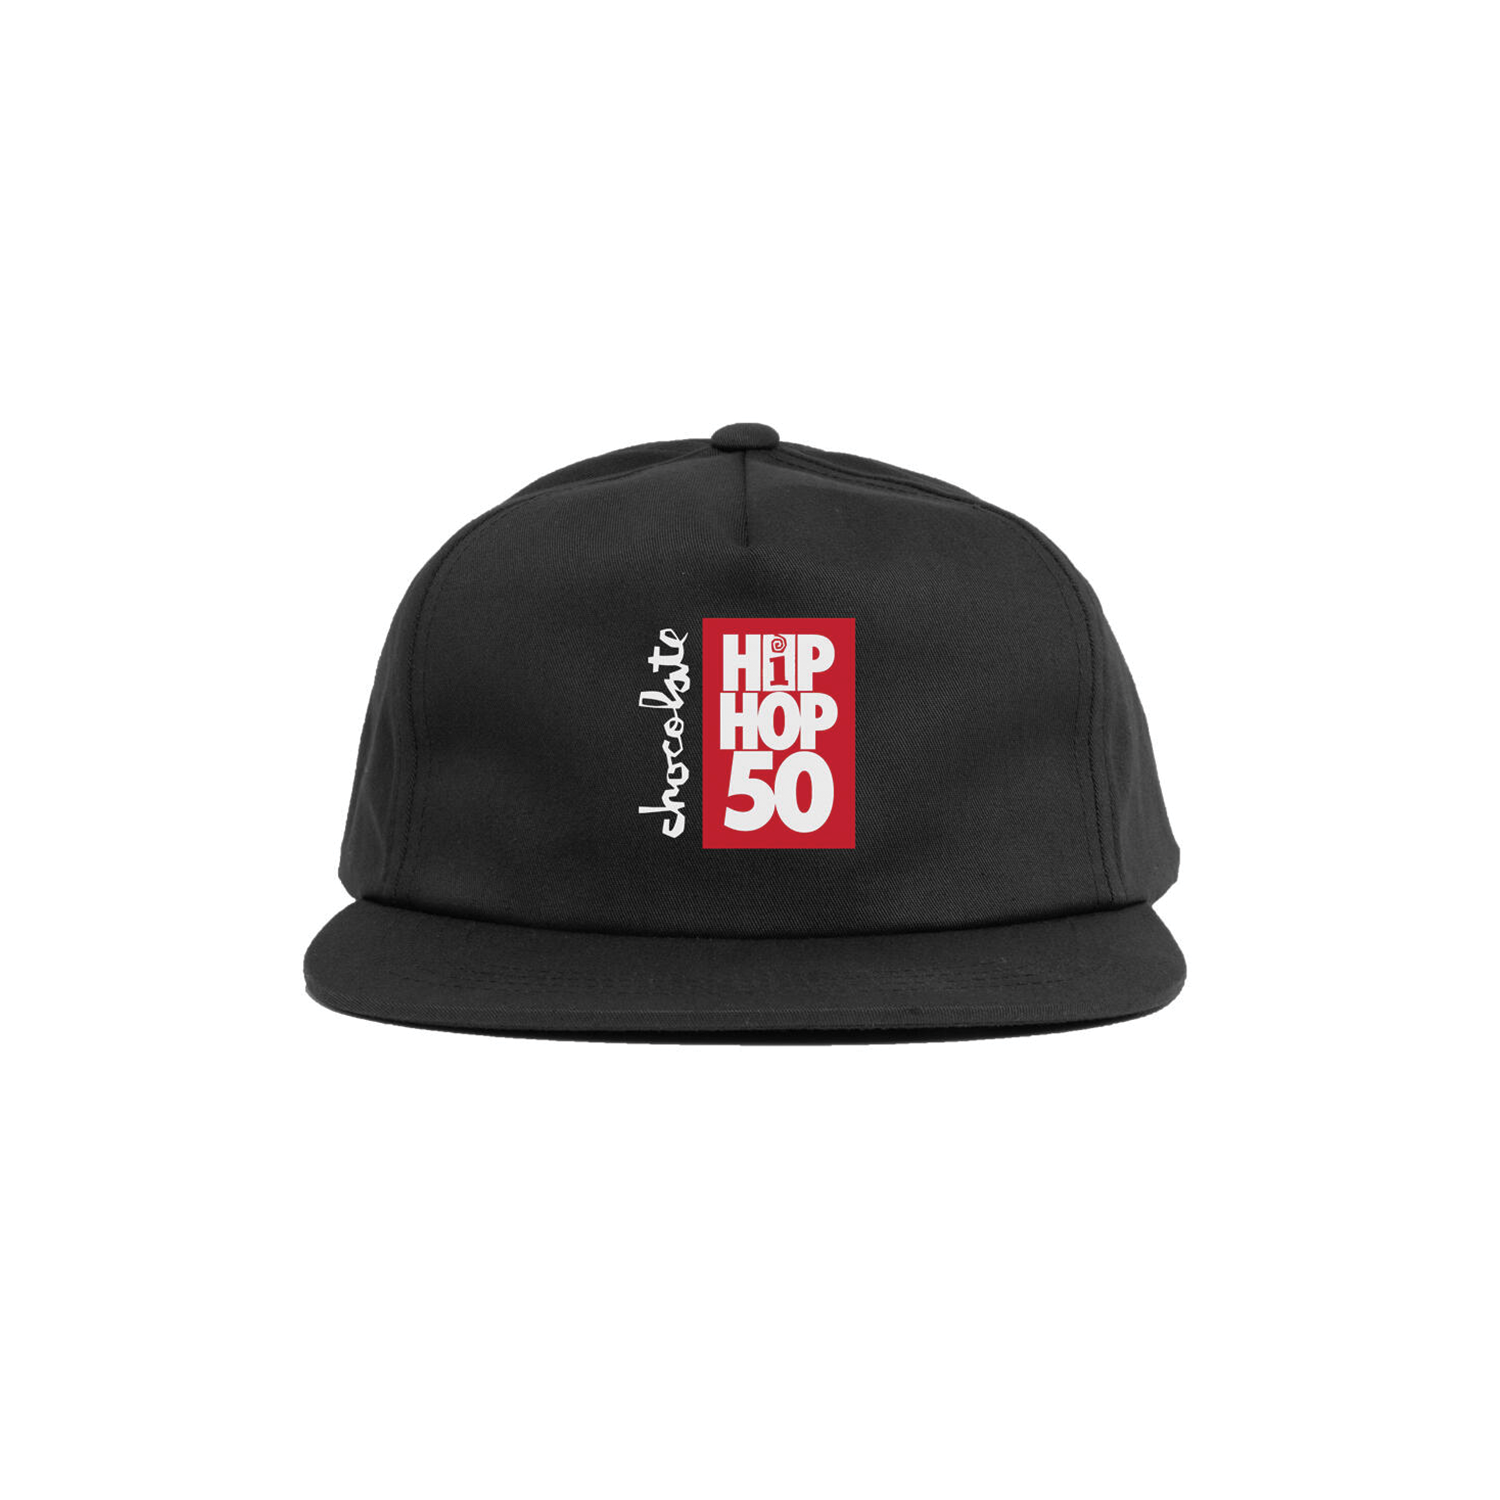 CHOCOLATE SKATEBOARDS - INTERSCOPE RECORDS 50 YEARS OF HIP HOP -BLACK SNAPBACK HAT